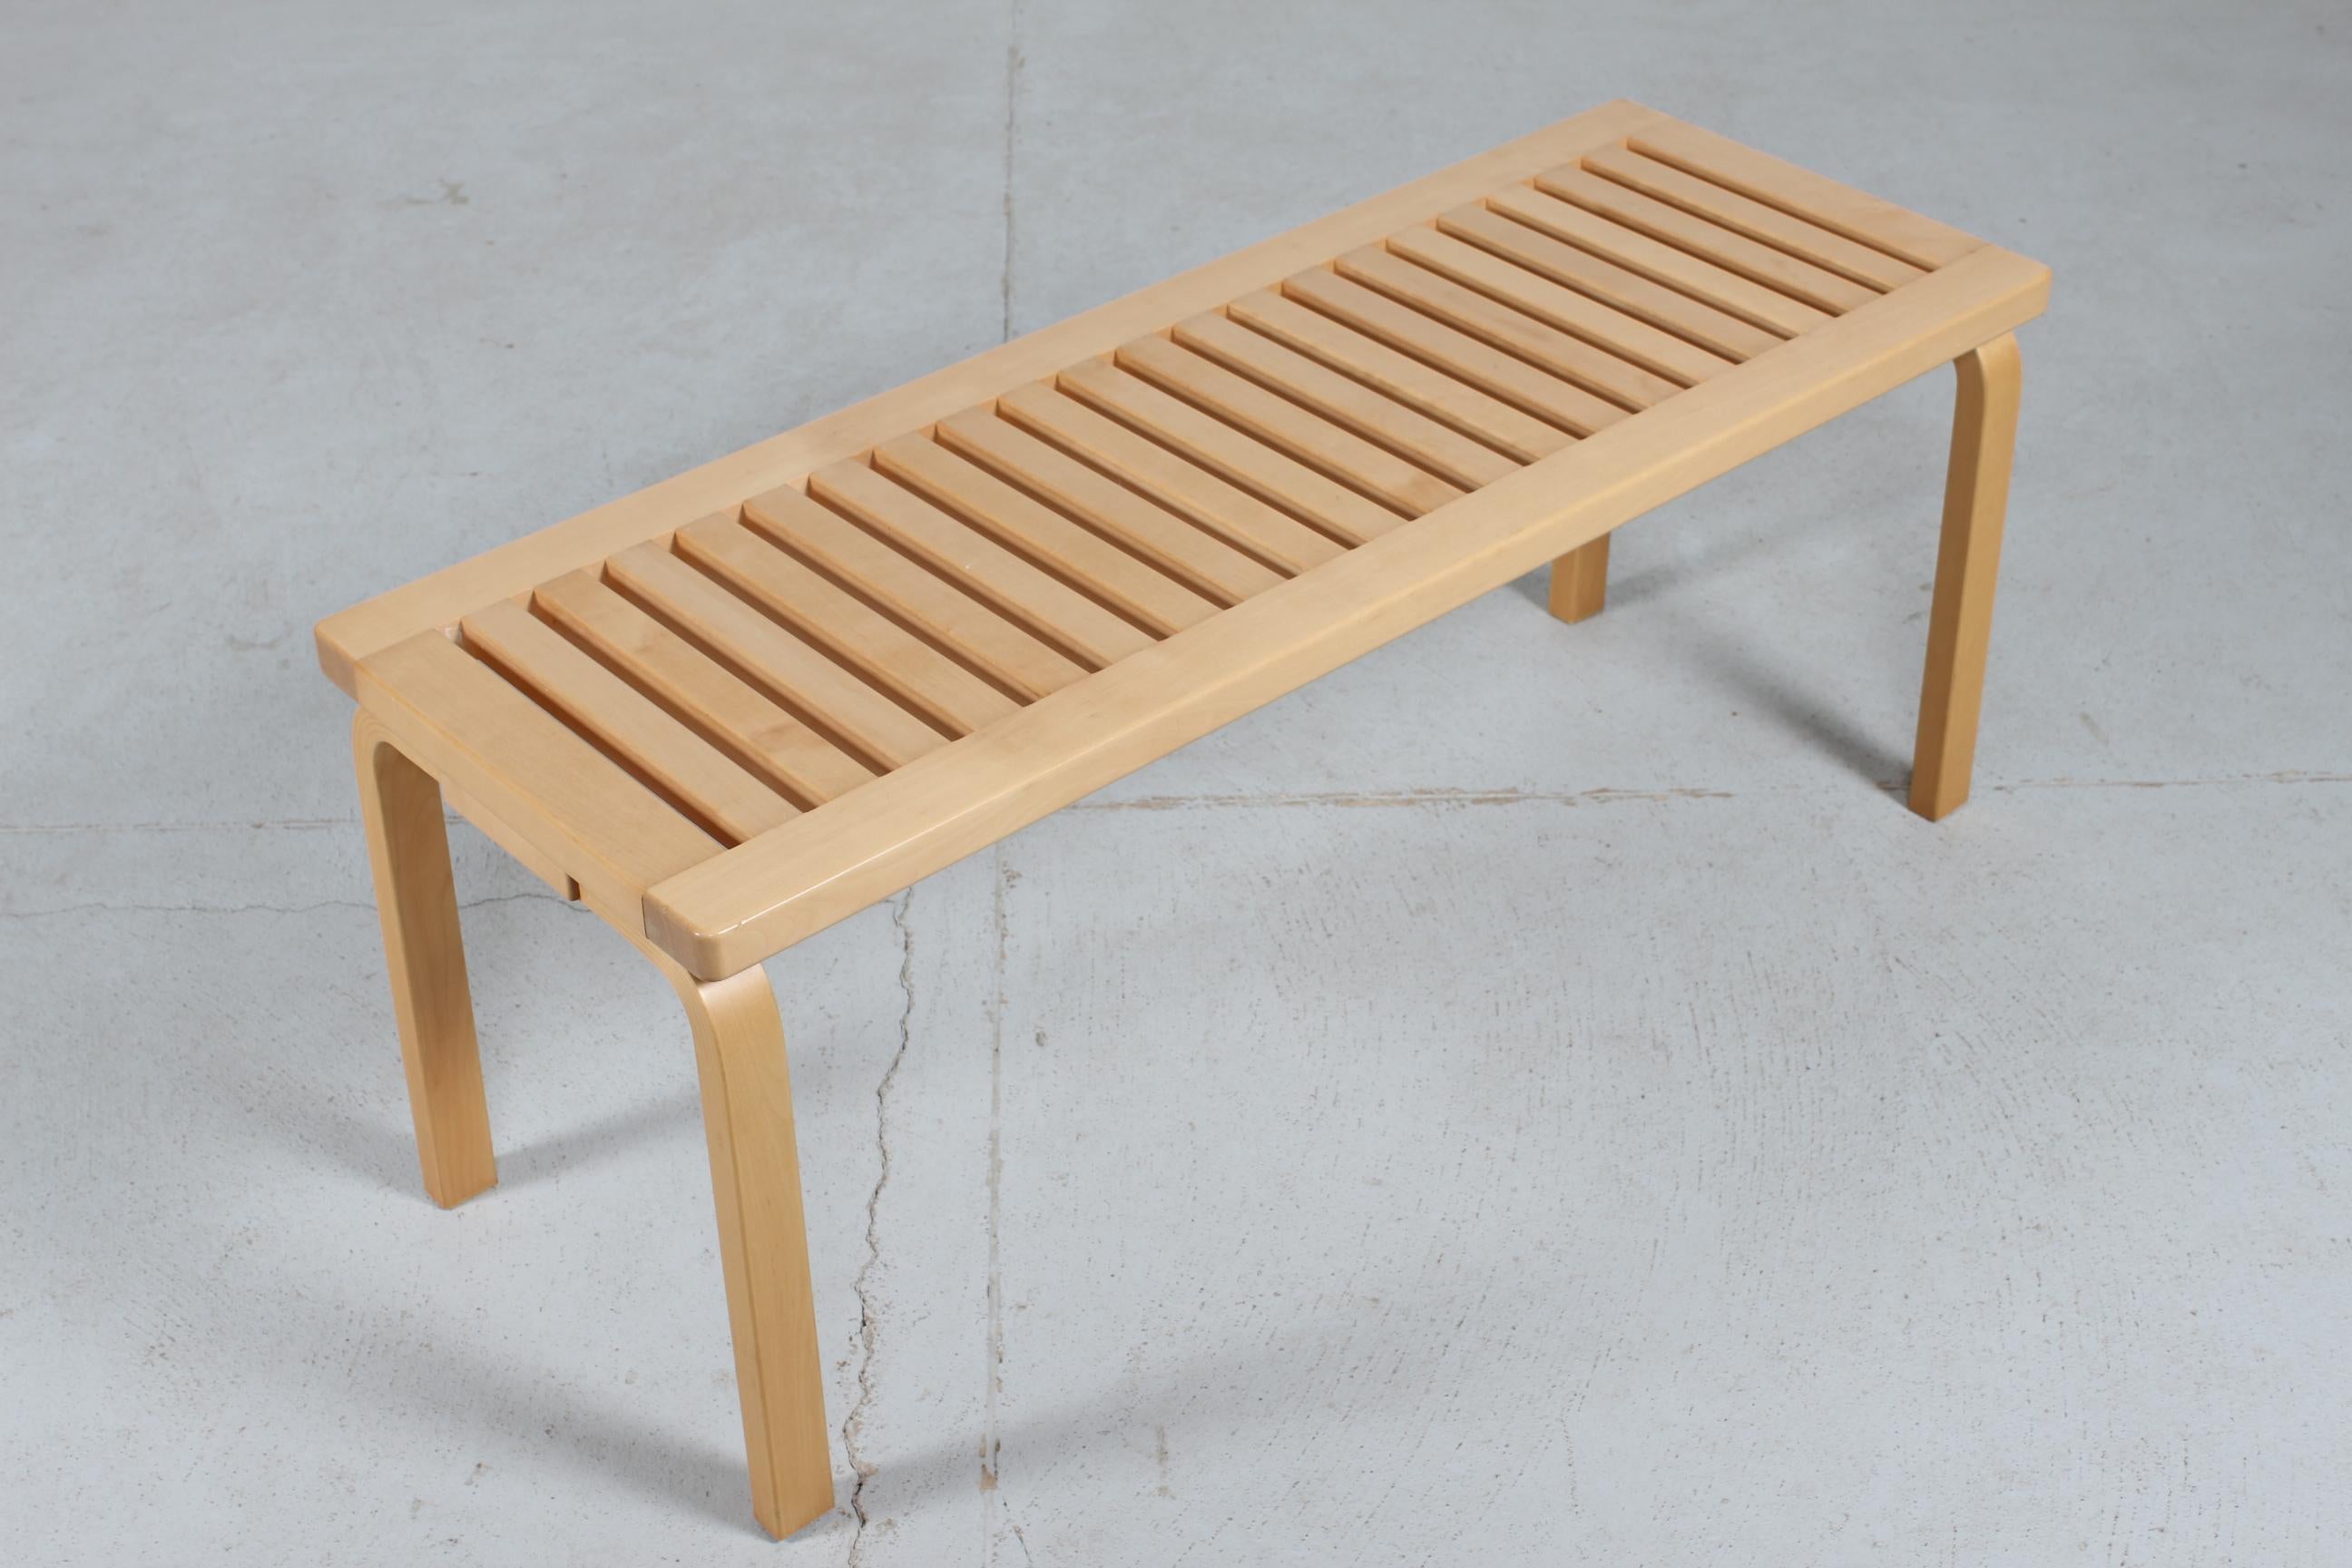 Lacquered Vintage Alvar Alto Low Bench 153A of Birch by Artek in Finland 1980s. For Sale